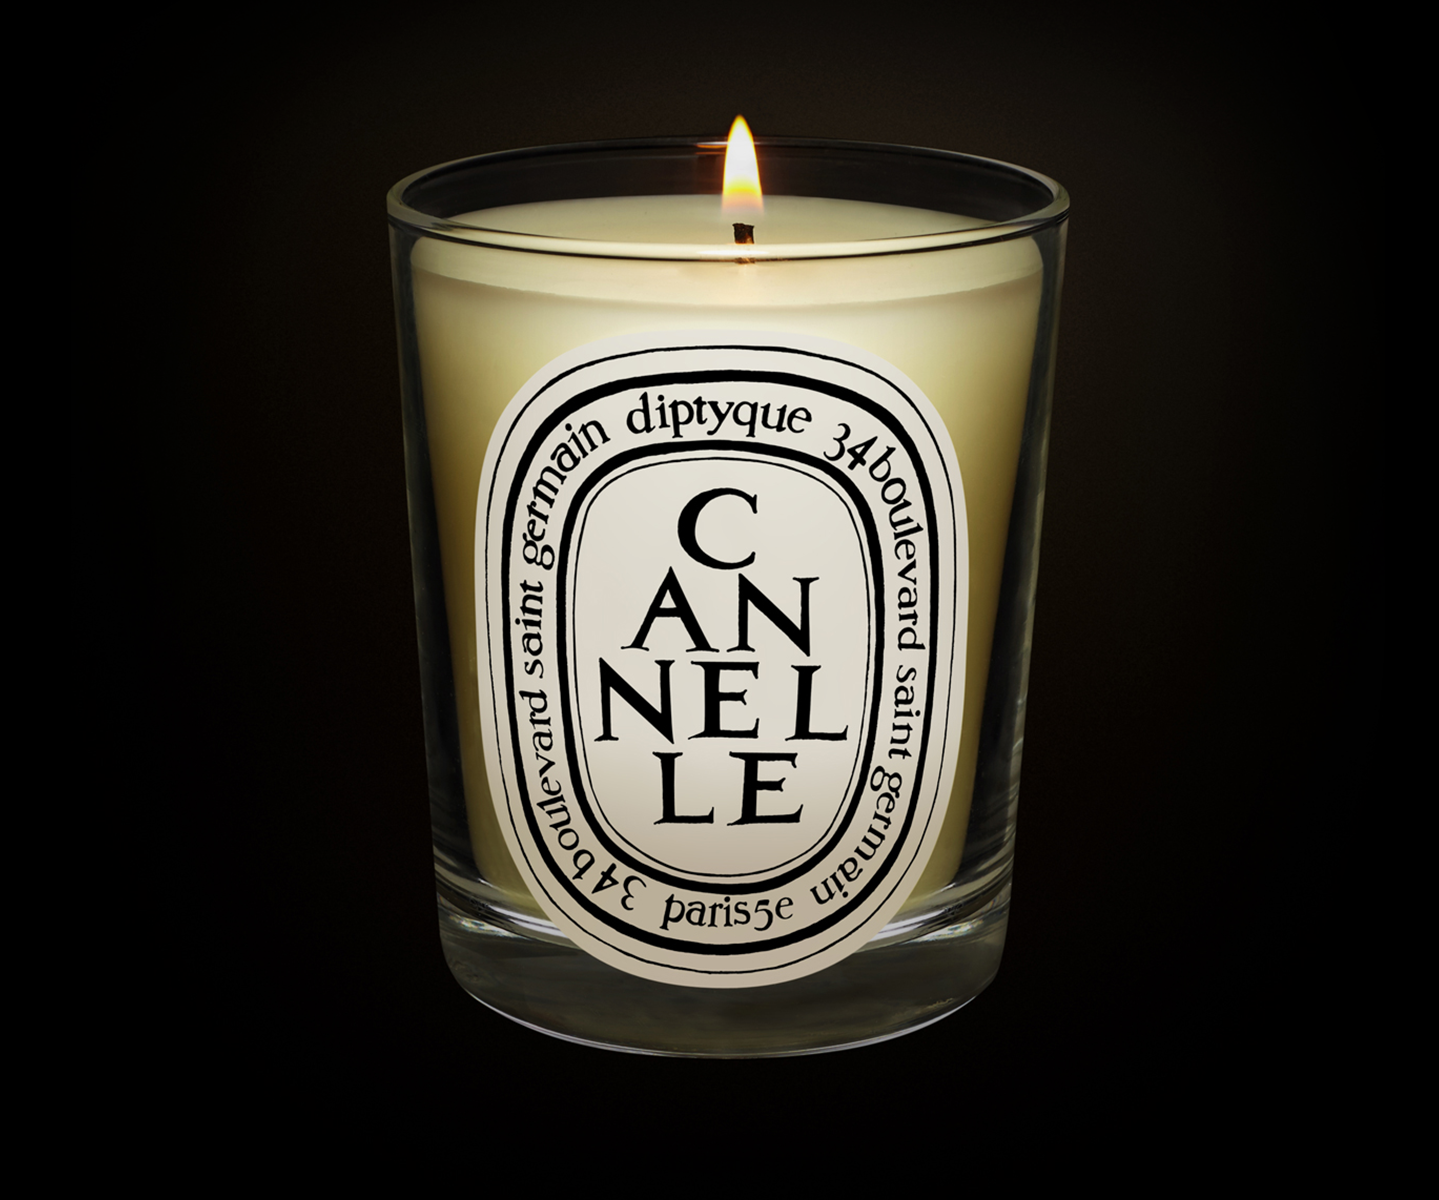 Lou Serpent & Dove Inspired Soy Candle Scent Notes: Cinnamon Spice 